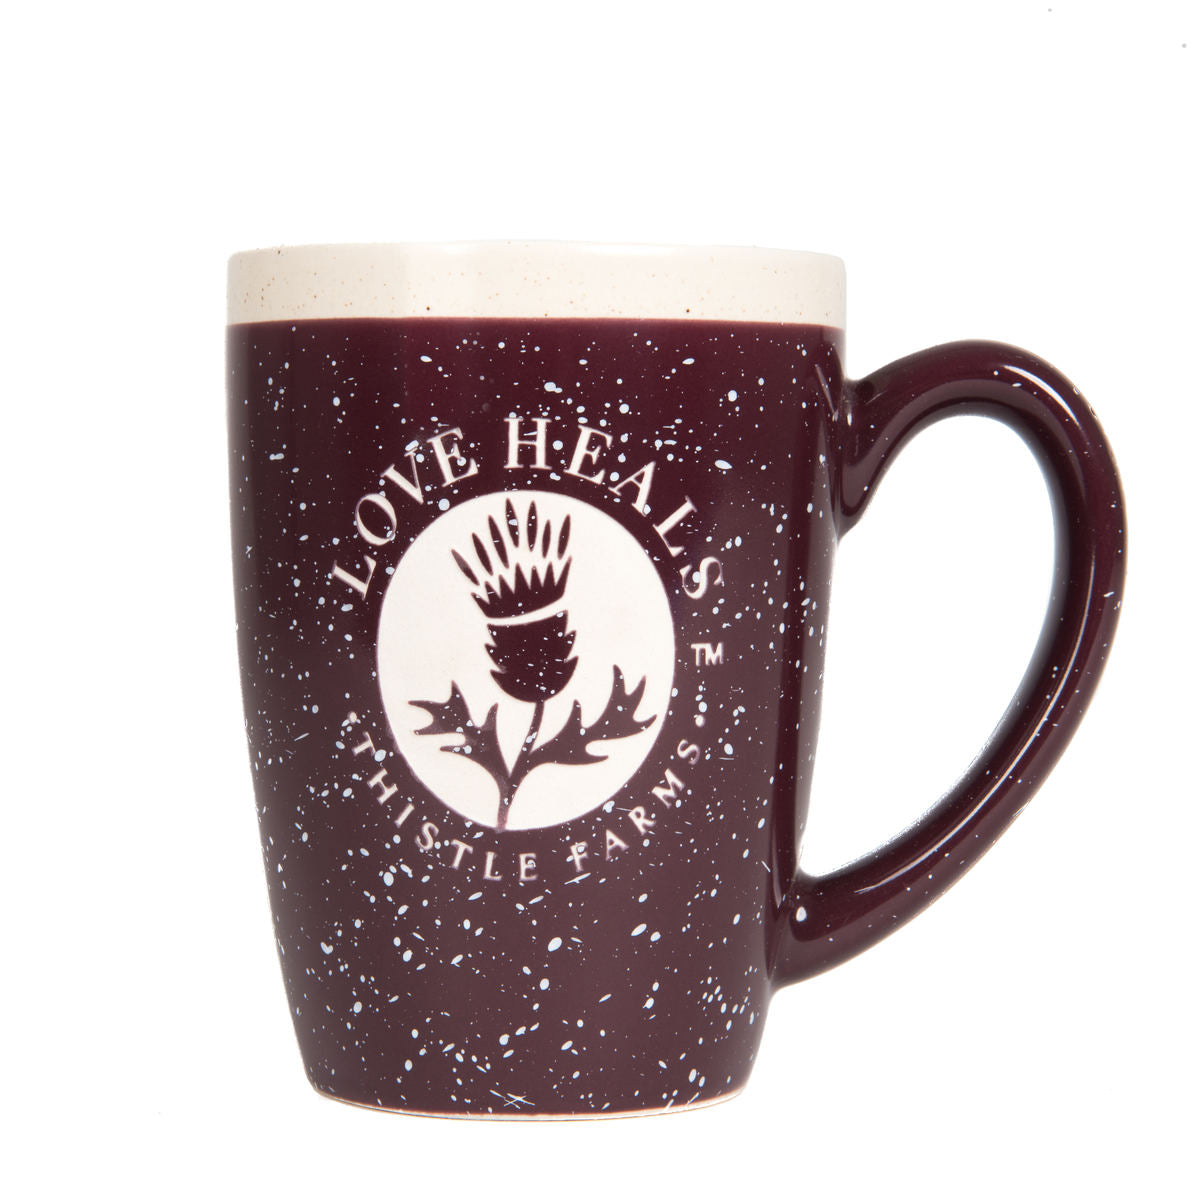 Thistle Farms Love Heals Thistle Mug, front view